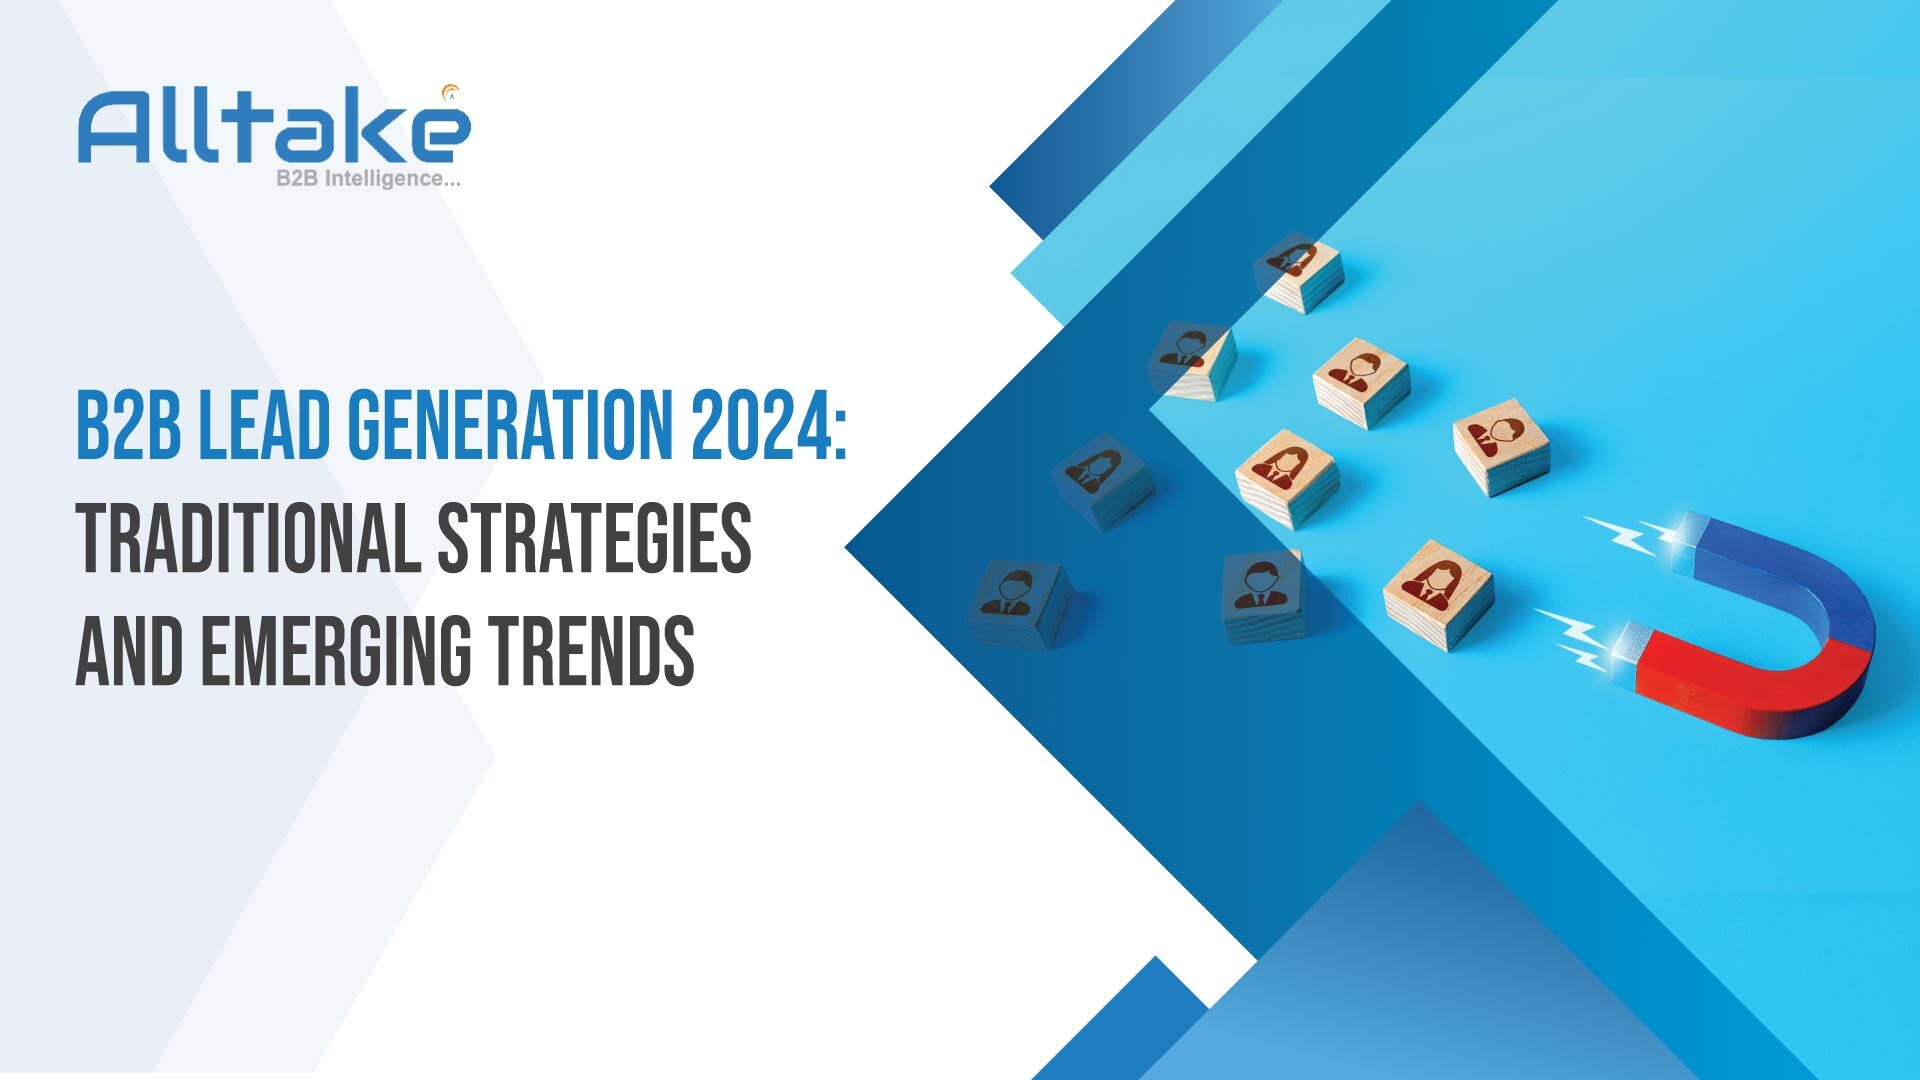 B2B Lead Generation 2024: Traditional Strategies and Emerging Trends